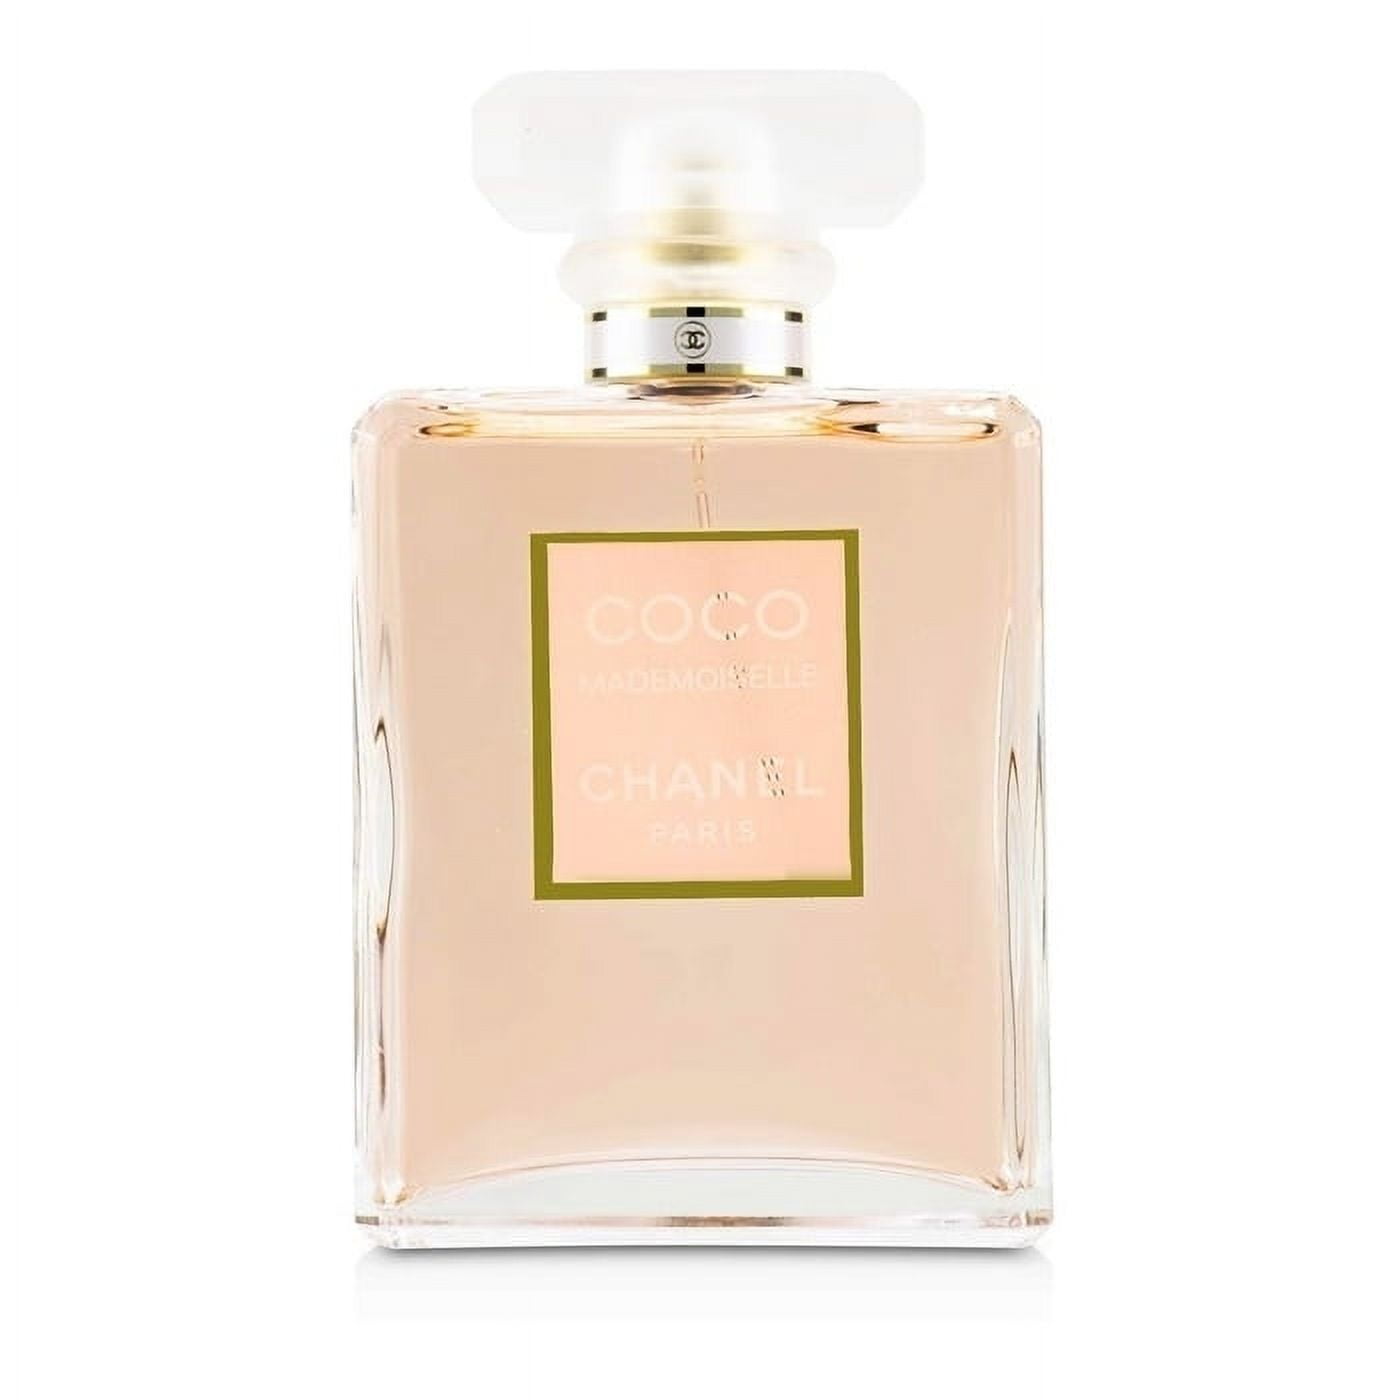 Coco Mademoiselle L'Eau Privée Spray - SweetCare United States